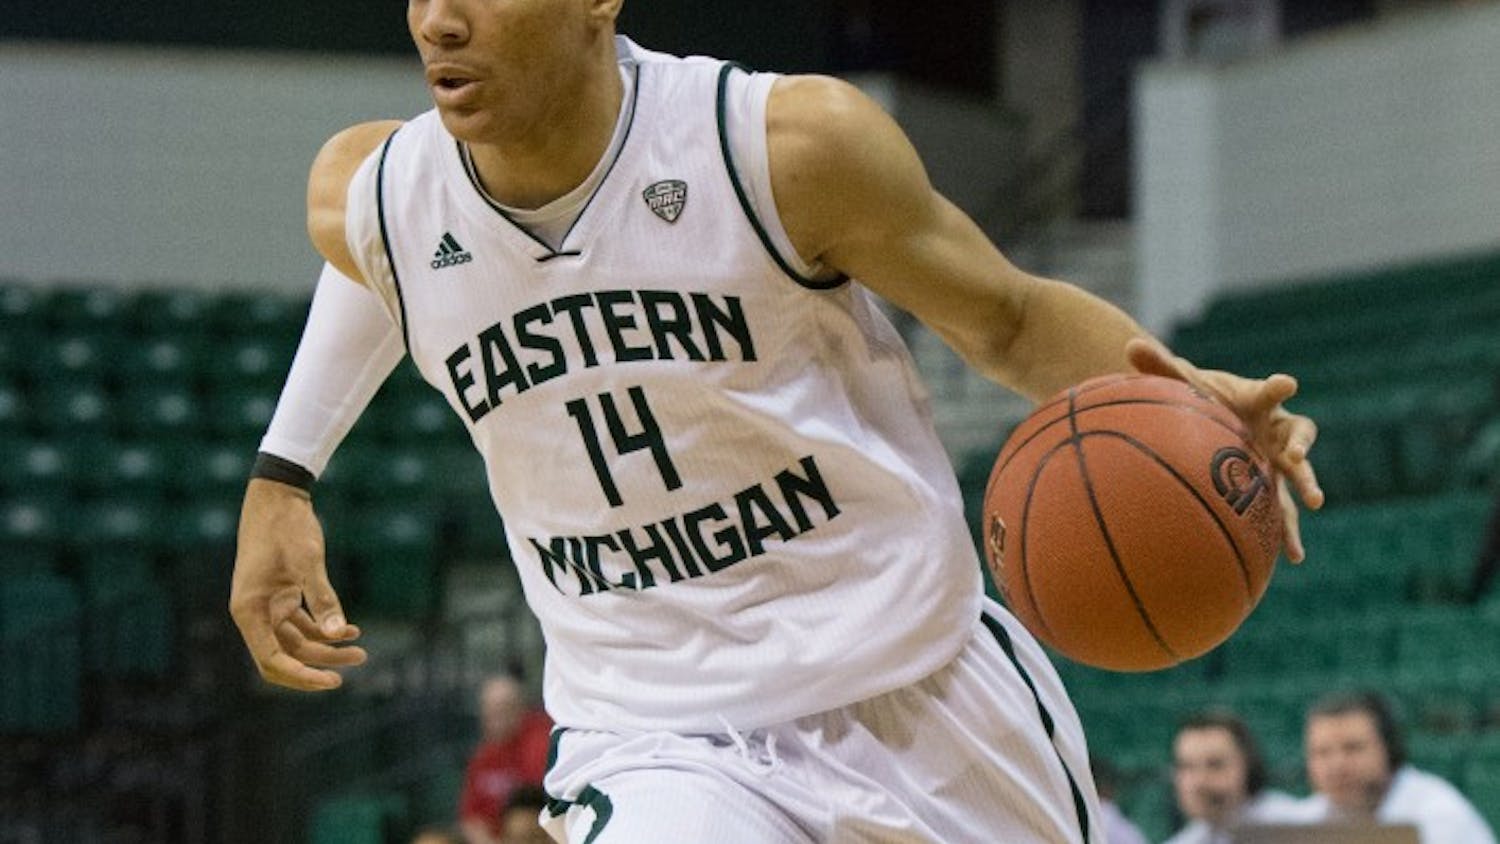 Eastern Michigan forward Karrington Ward (14) drives up the court in the Eagles 58-54 win over Norfolk State in the first round of the College Insiders Tournament Tuesday night.